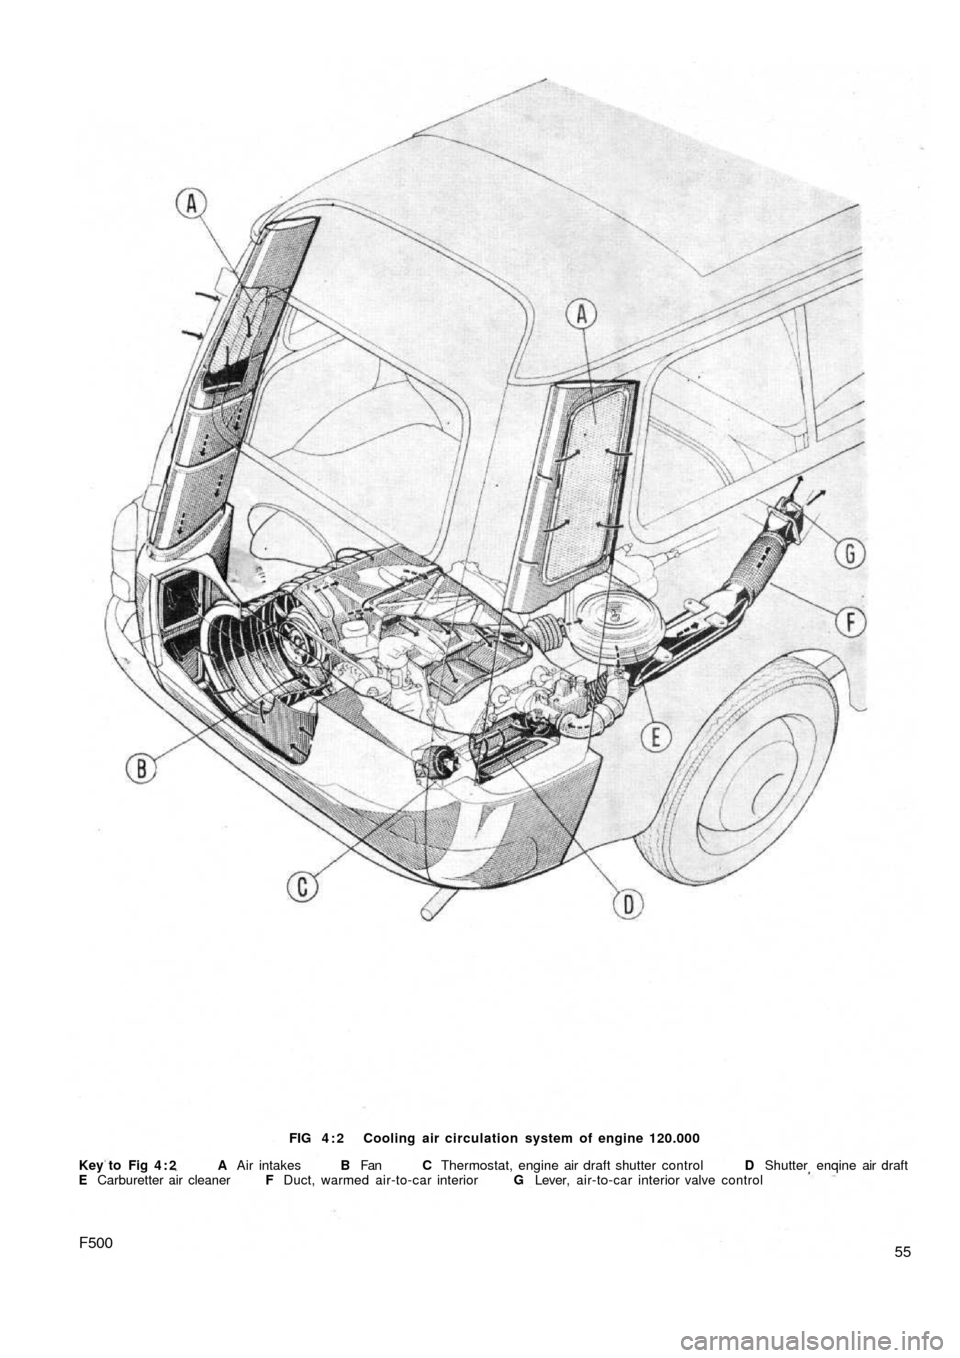 FIAT 500 1970 1.G Service Manual 55F500
FIG 4 : 2  Cooling air circulation system of engine 120.000
Key to  Fig  4 : 2  A Air intakes B Fan C  Thermostat, engine air draft shutter control D Shutter enqine air draft
E Carburetter air 